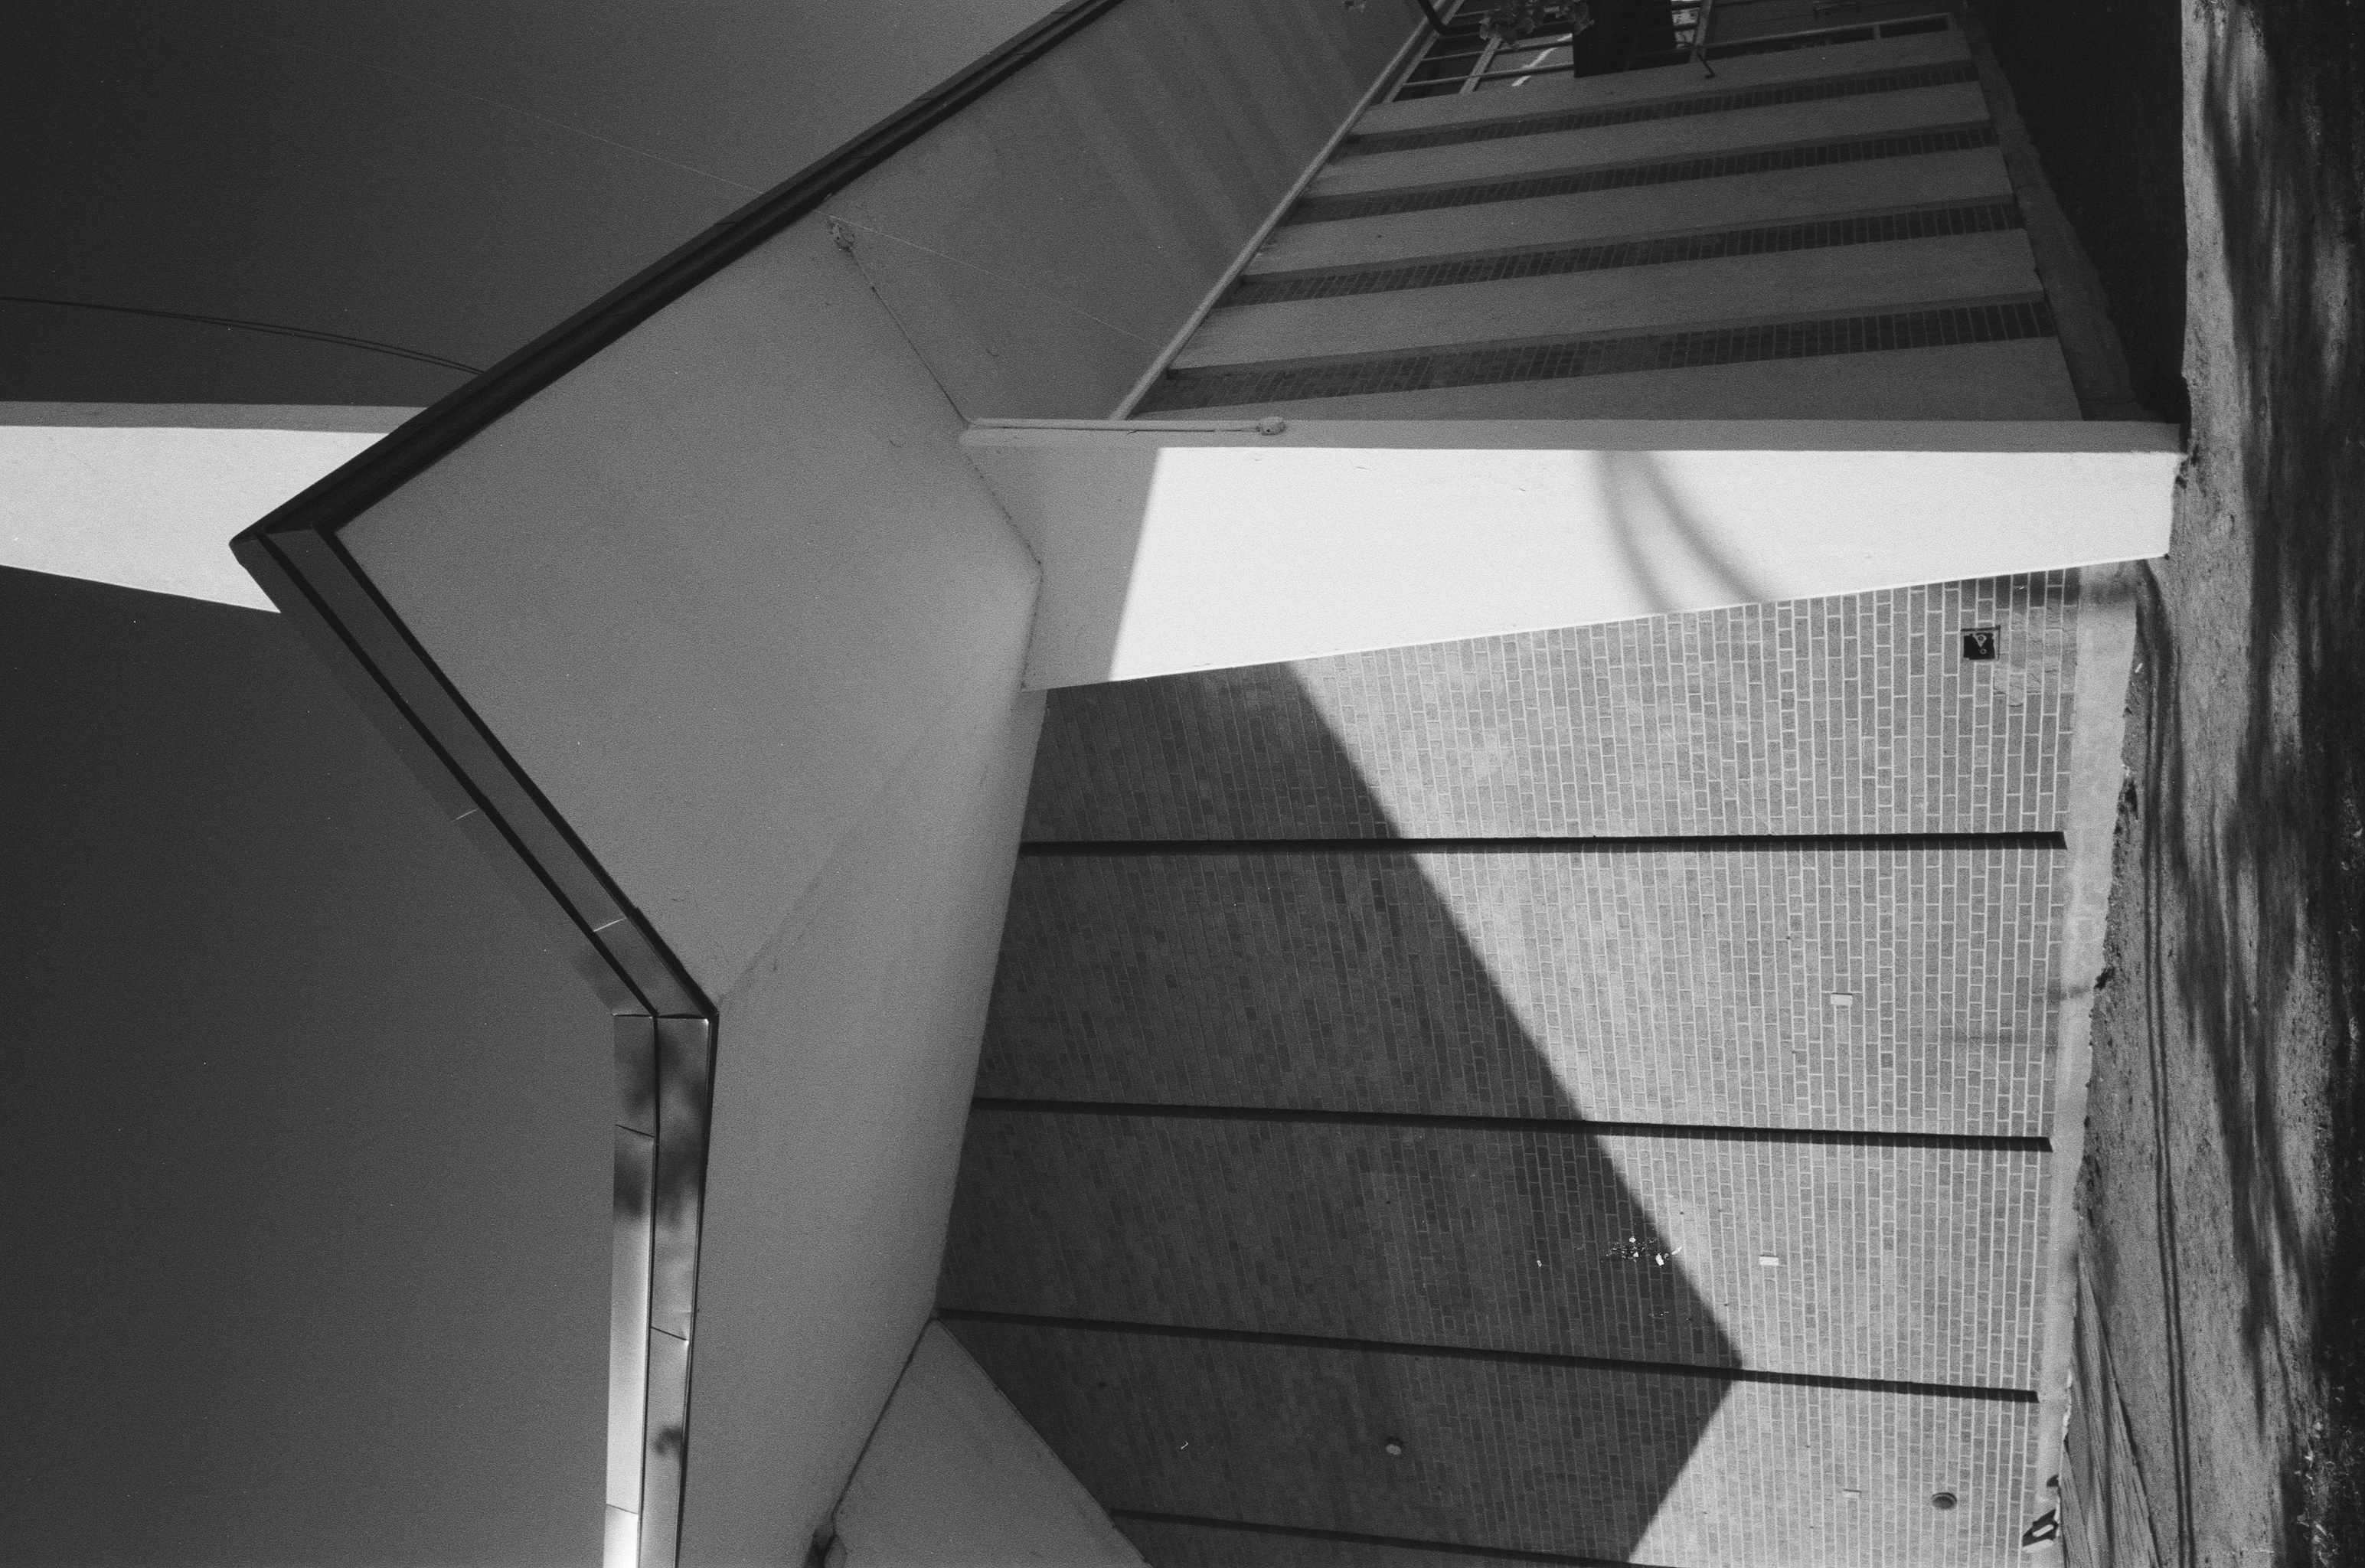 A black & white photograph of a mid-century modern style building